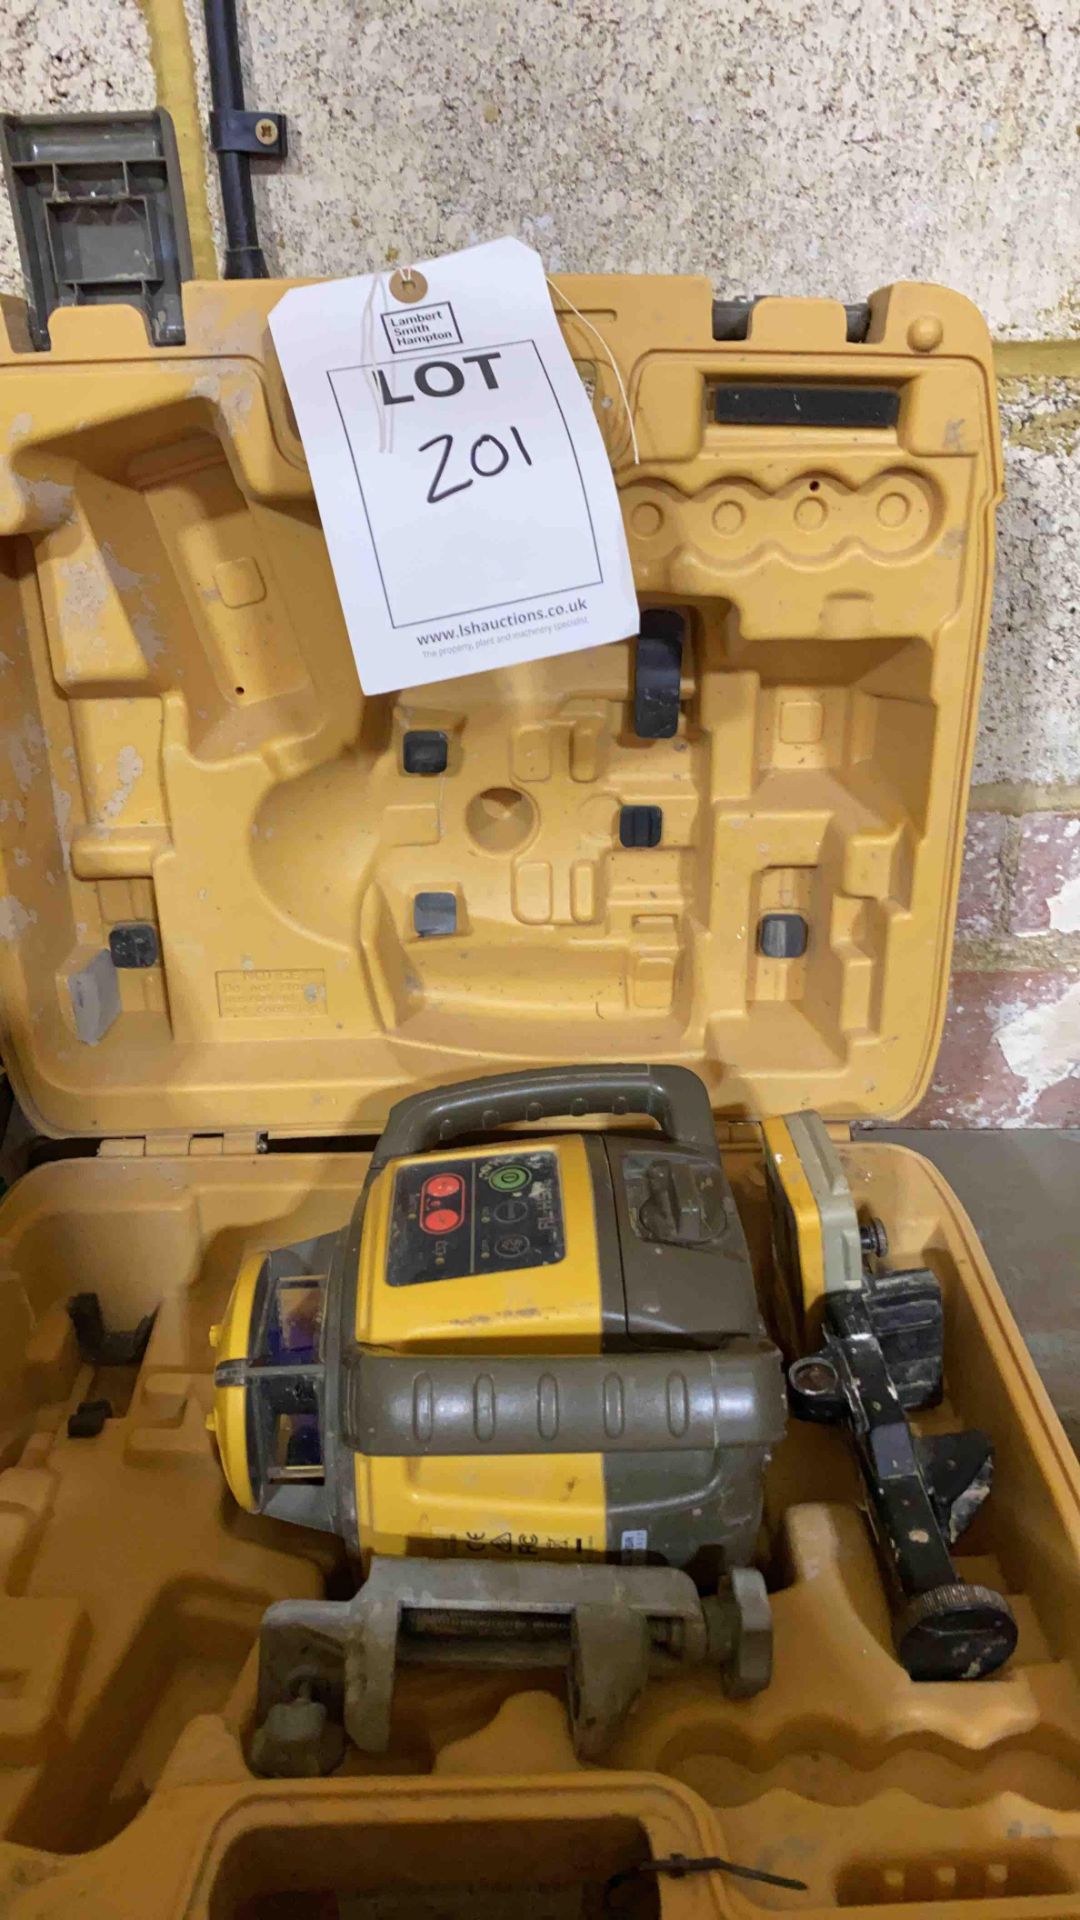 Topcon RL-H4C Laser Level, Complete with carry case and spectra HR320 hand held control - Image 4 of 4